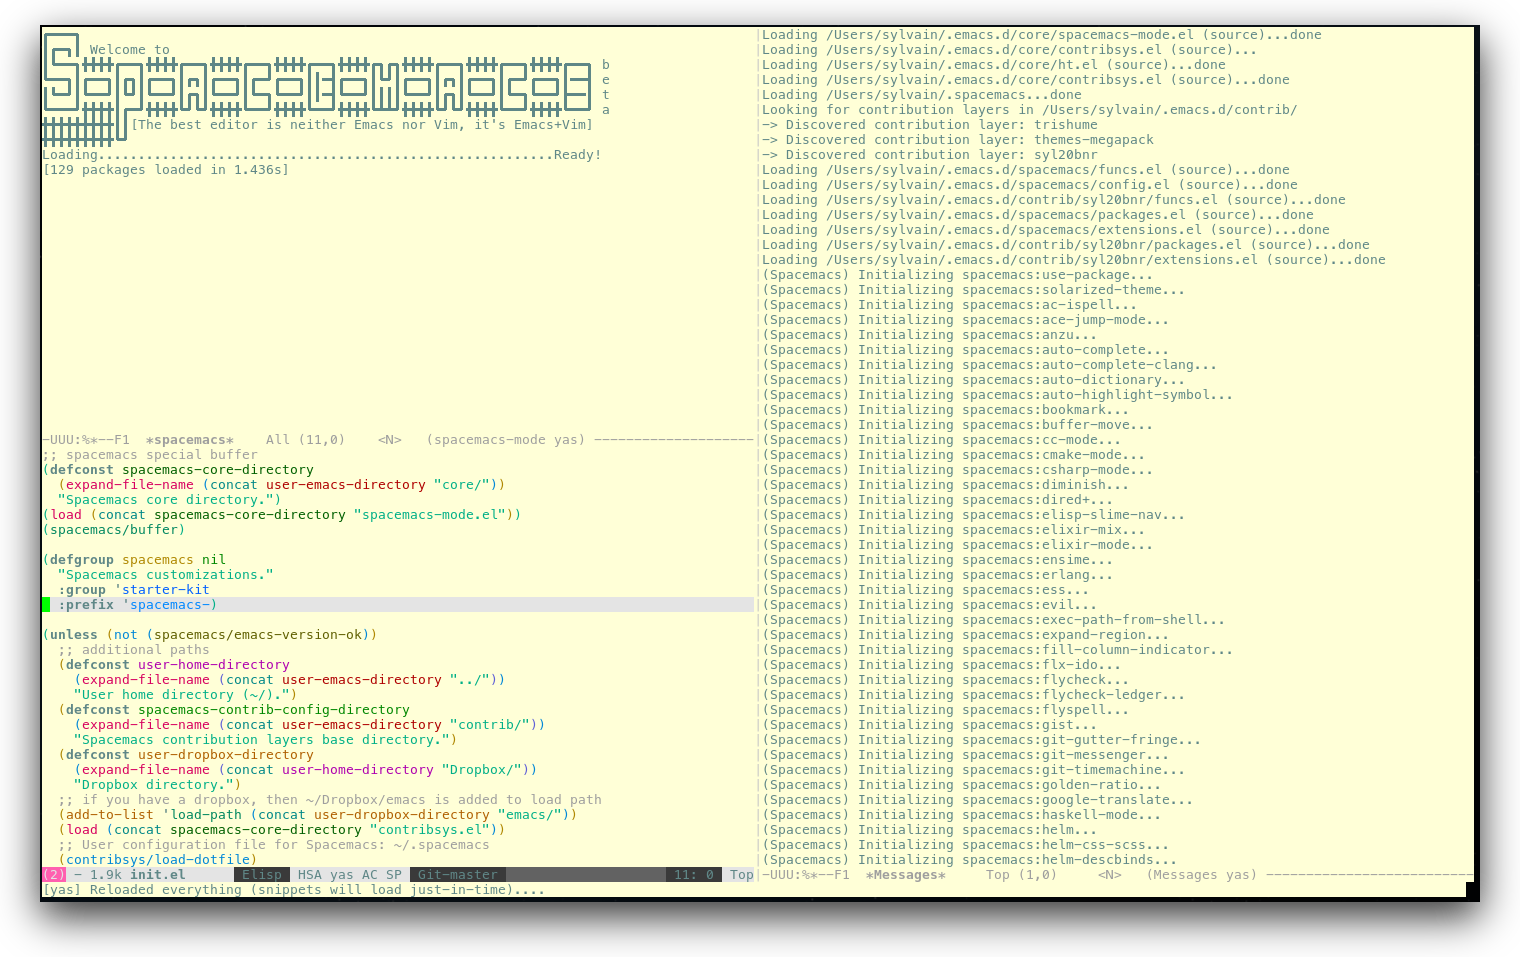 /TakeV/spacemacs/media/commit/d1c8e4b9f79acbc010a4c958bb588122024f4445/doc/img/spacemacs-urxvt.png